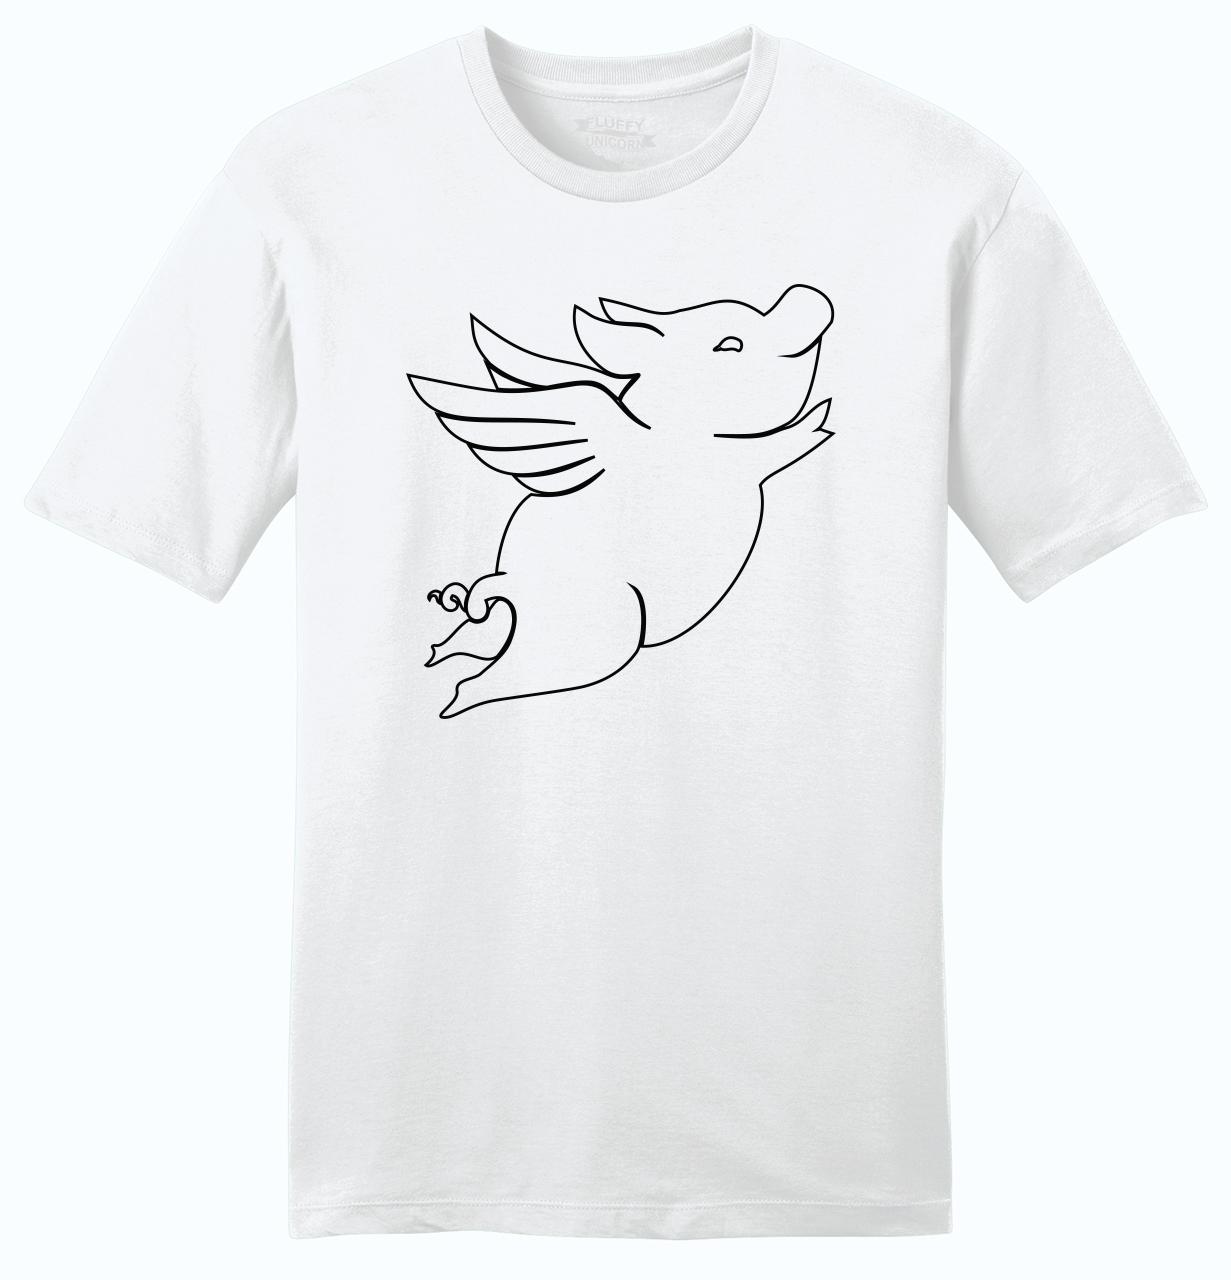 Mens When Pigs Fly Fying Pig Soft Tee Graphic Animal Shirt | eBay